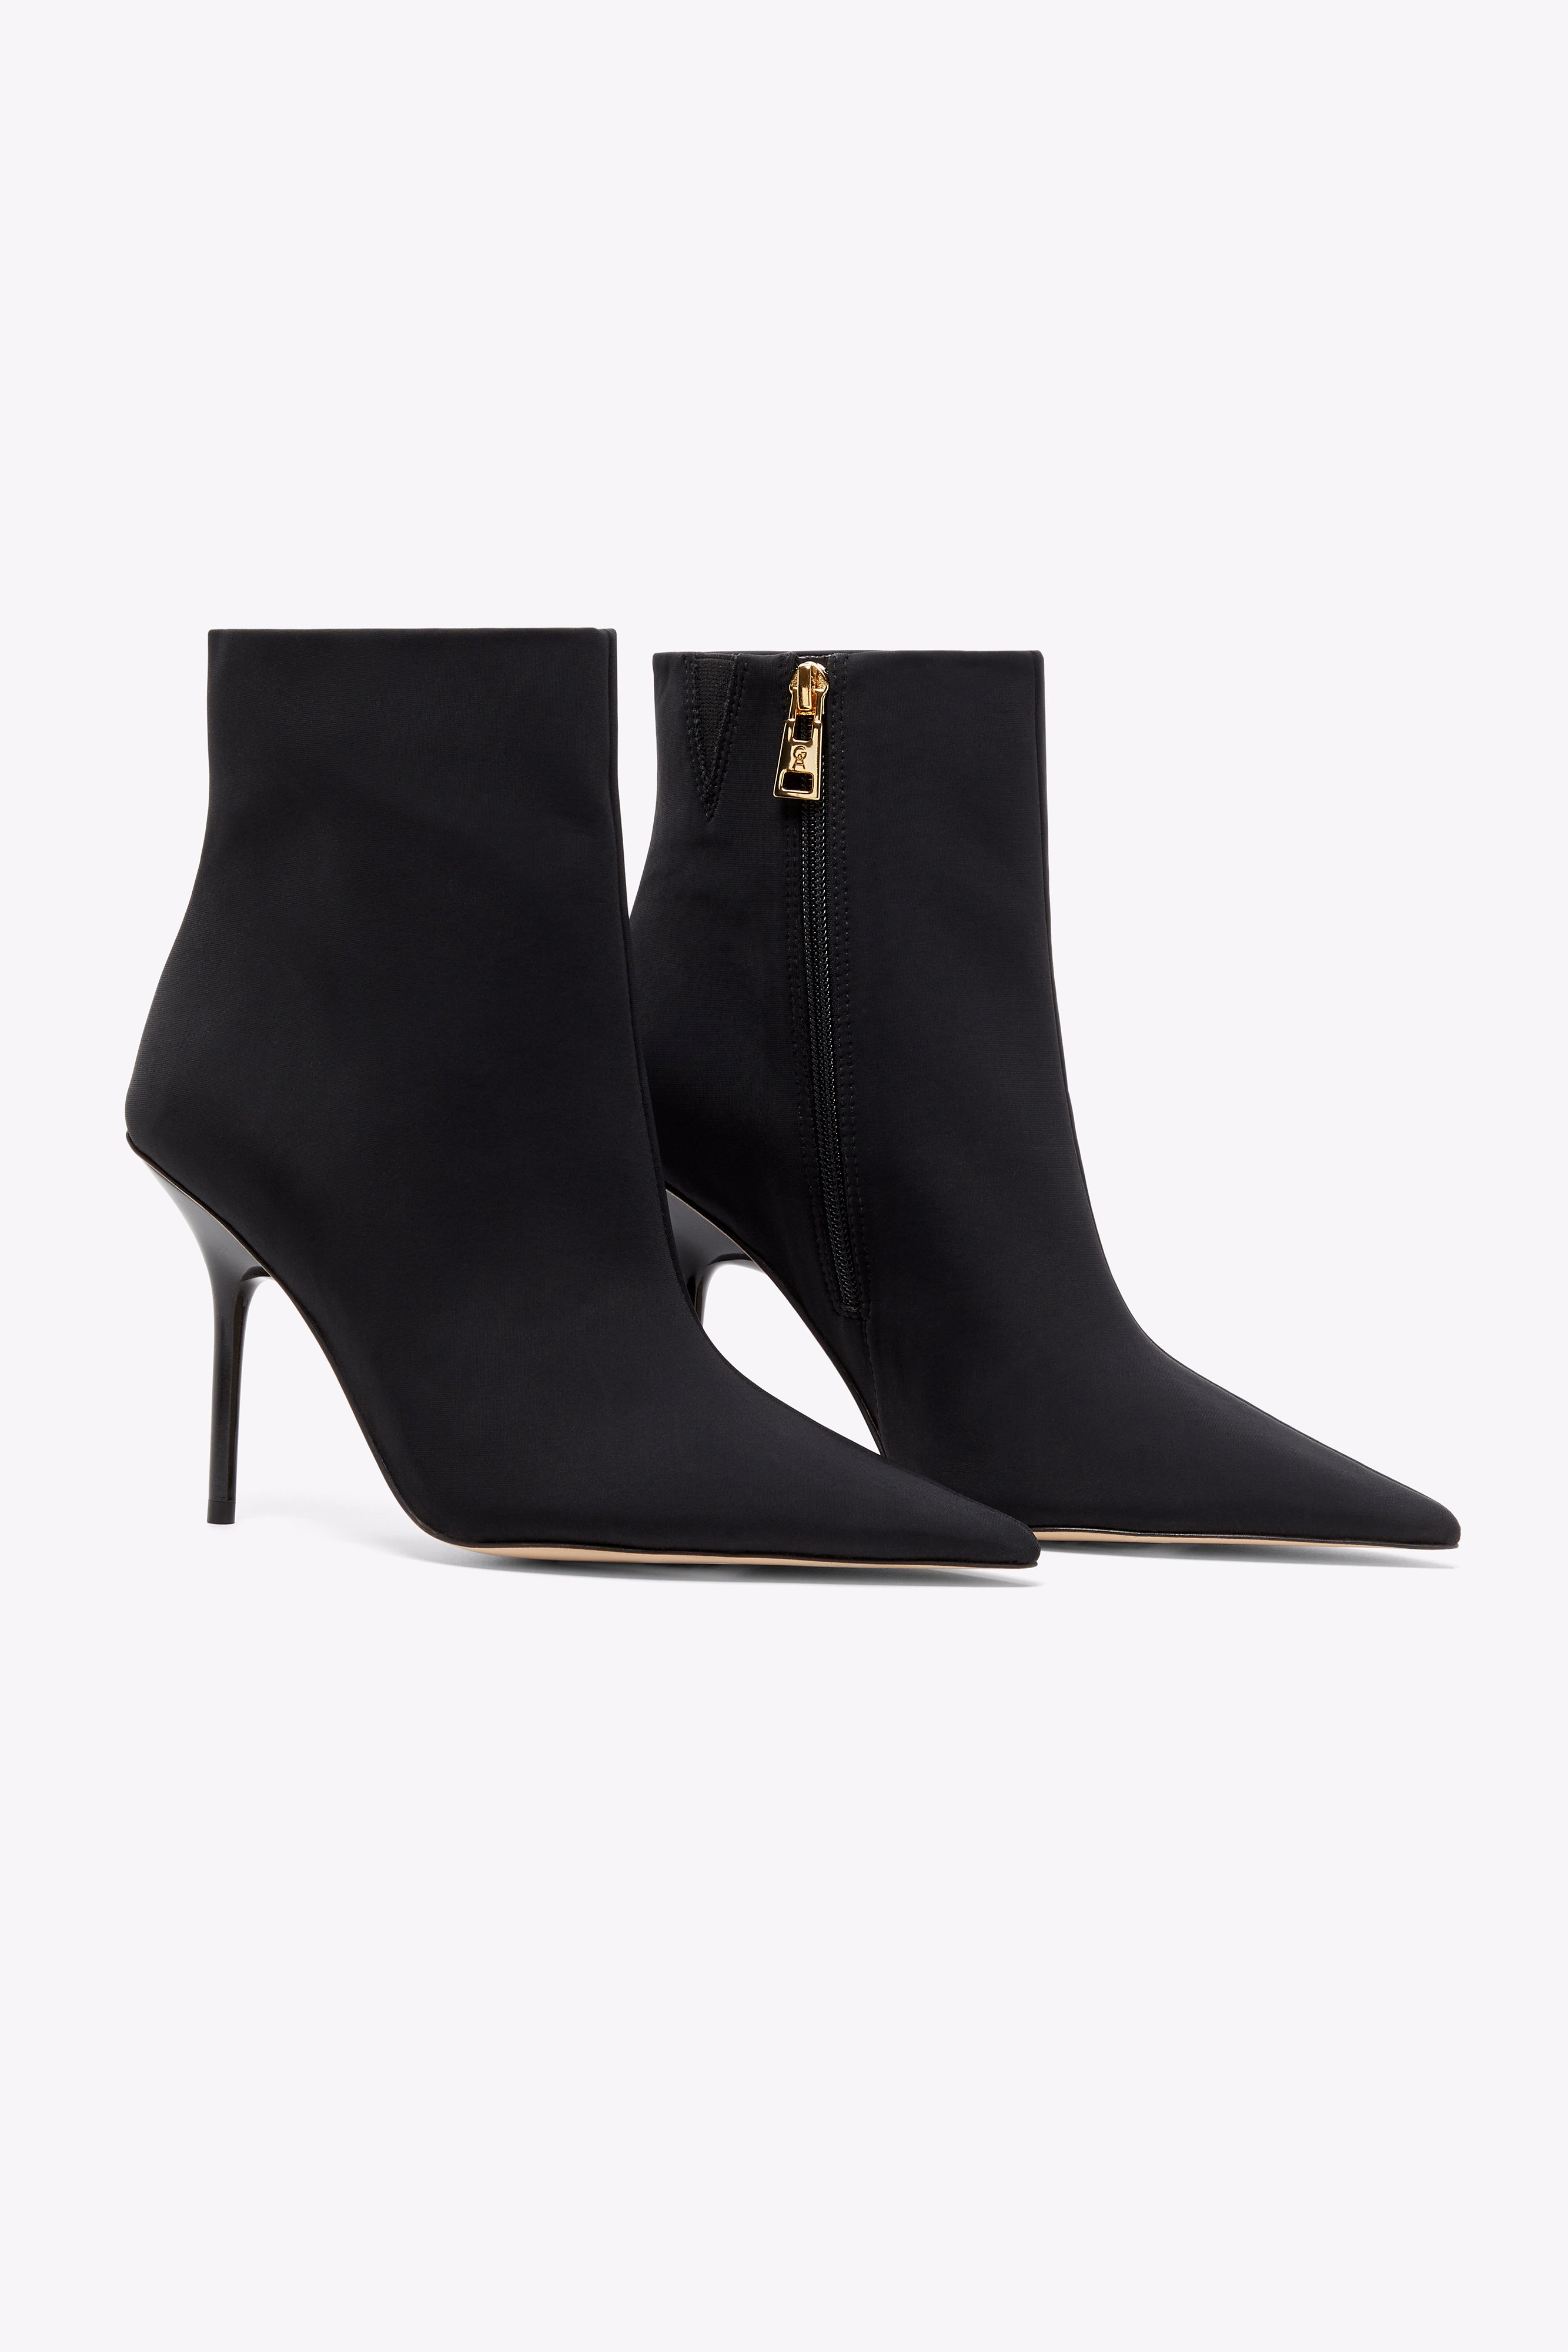 Styled with CLASSIC HEEL BOOTIE | BLACK001